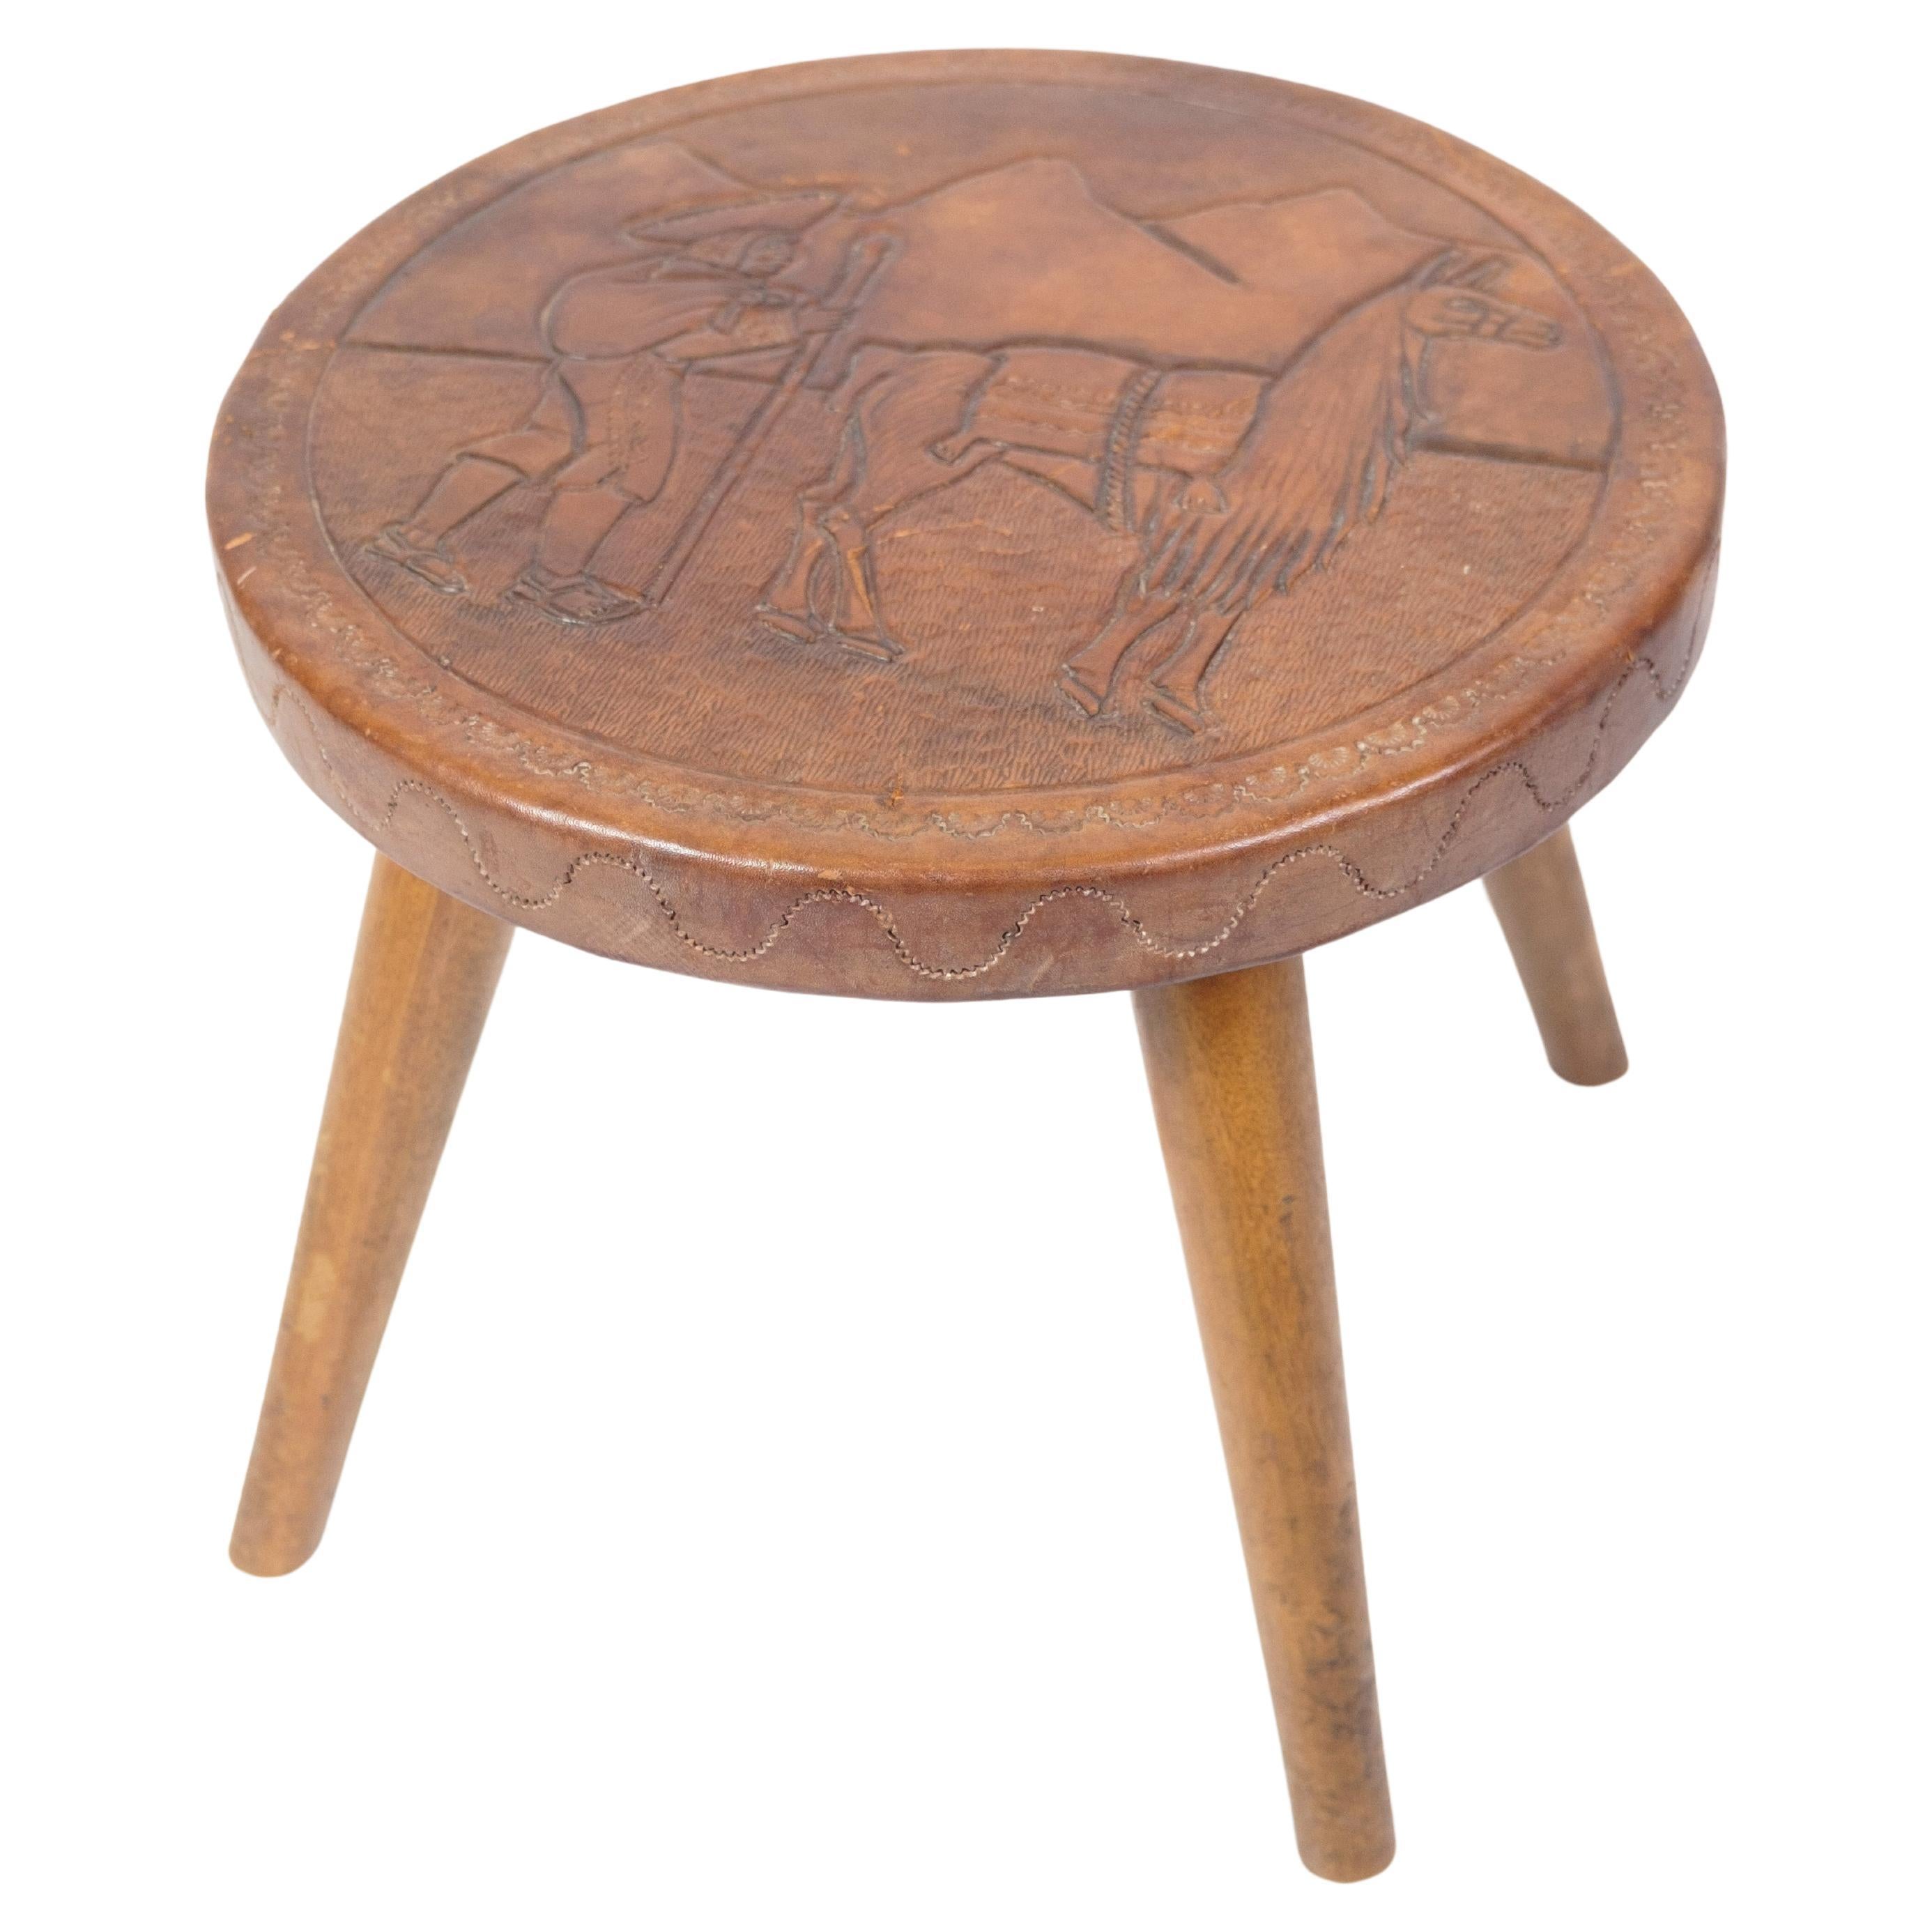 Antique Stool With Carvings Of Farmer With Alpaca From 1940s For Sale